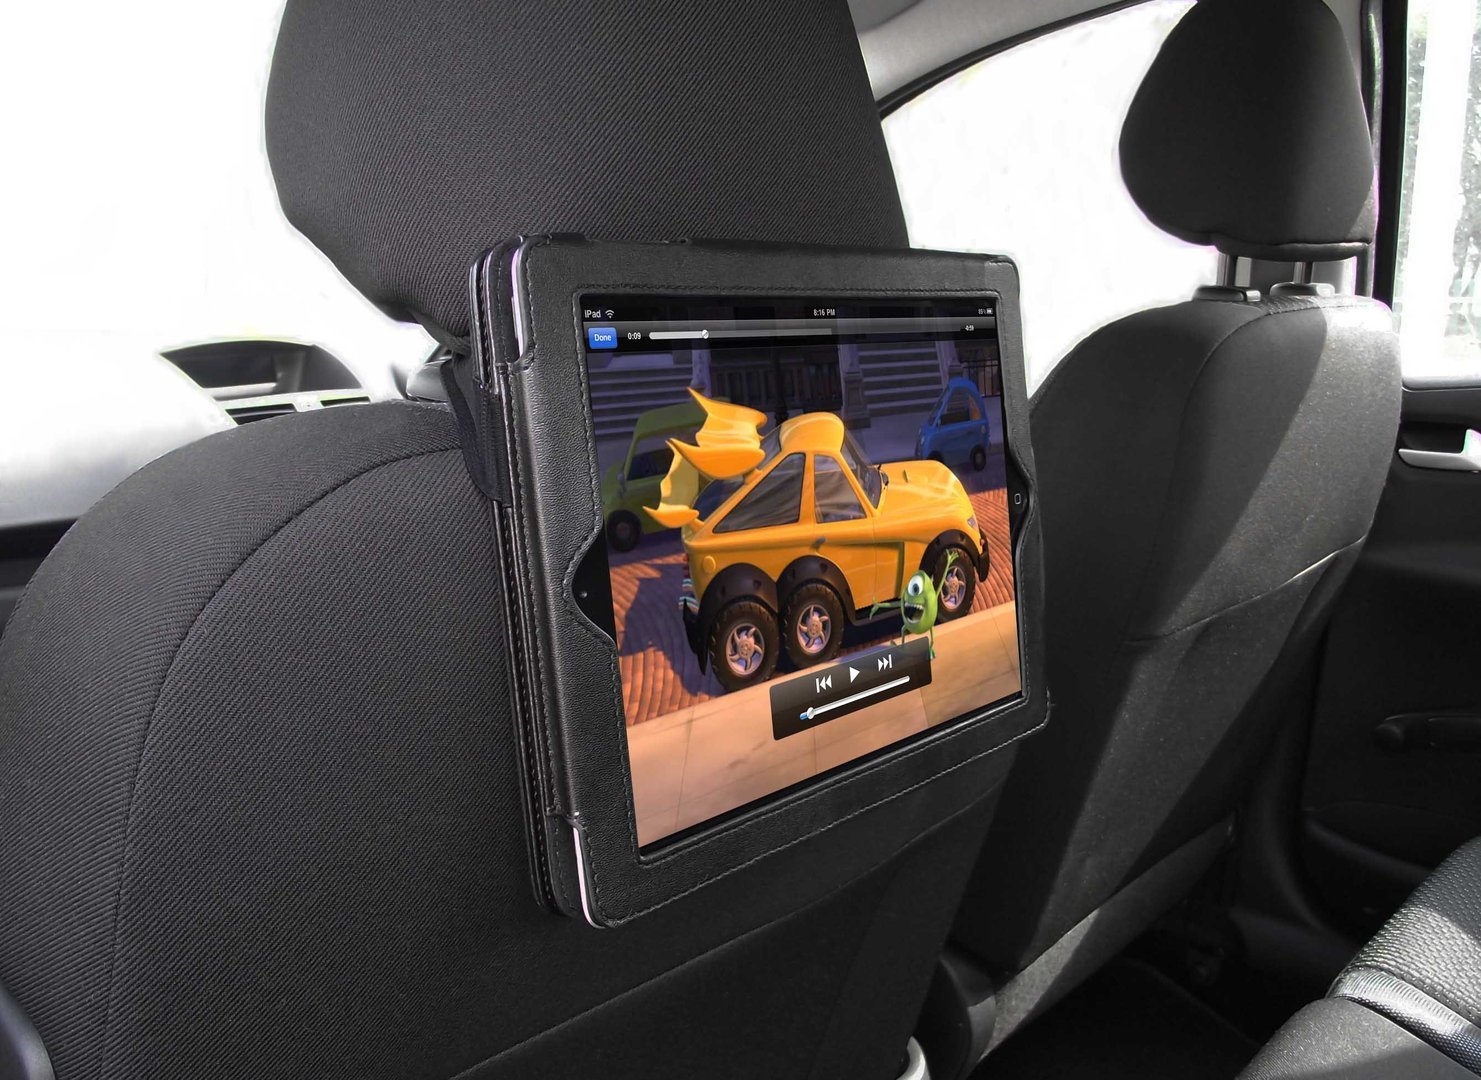 PU Leather Car Seat Headrest Mounting Strap Holder Case for iPad 2 3 4 Protect 